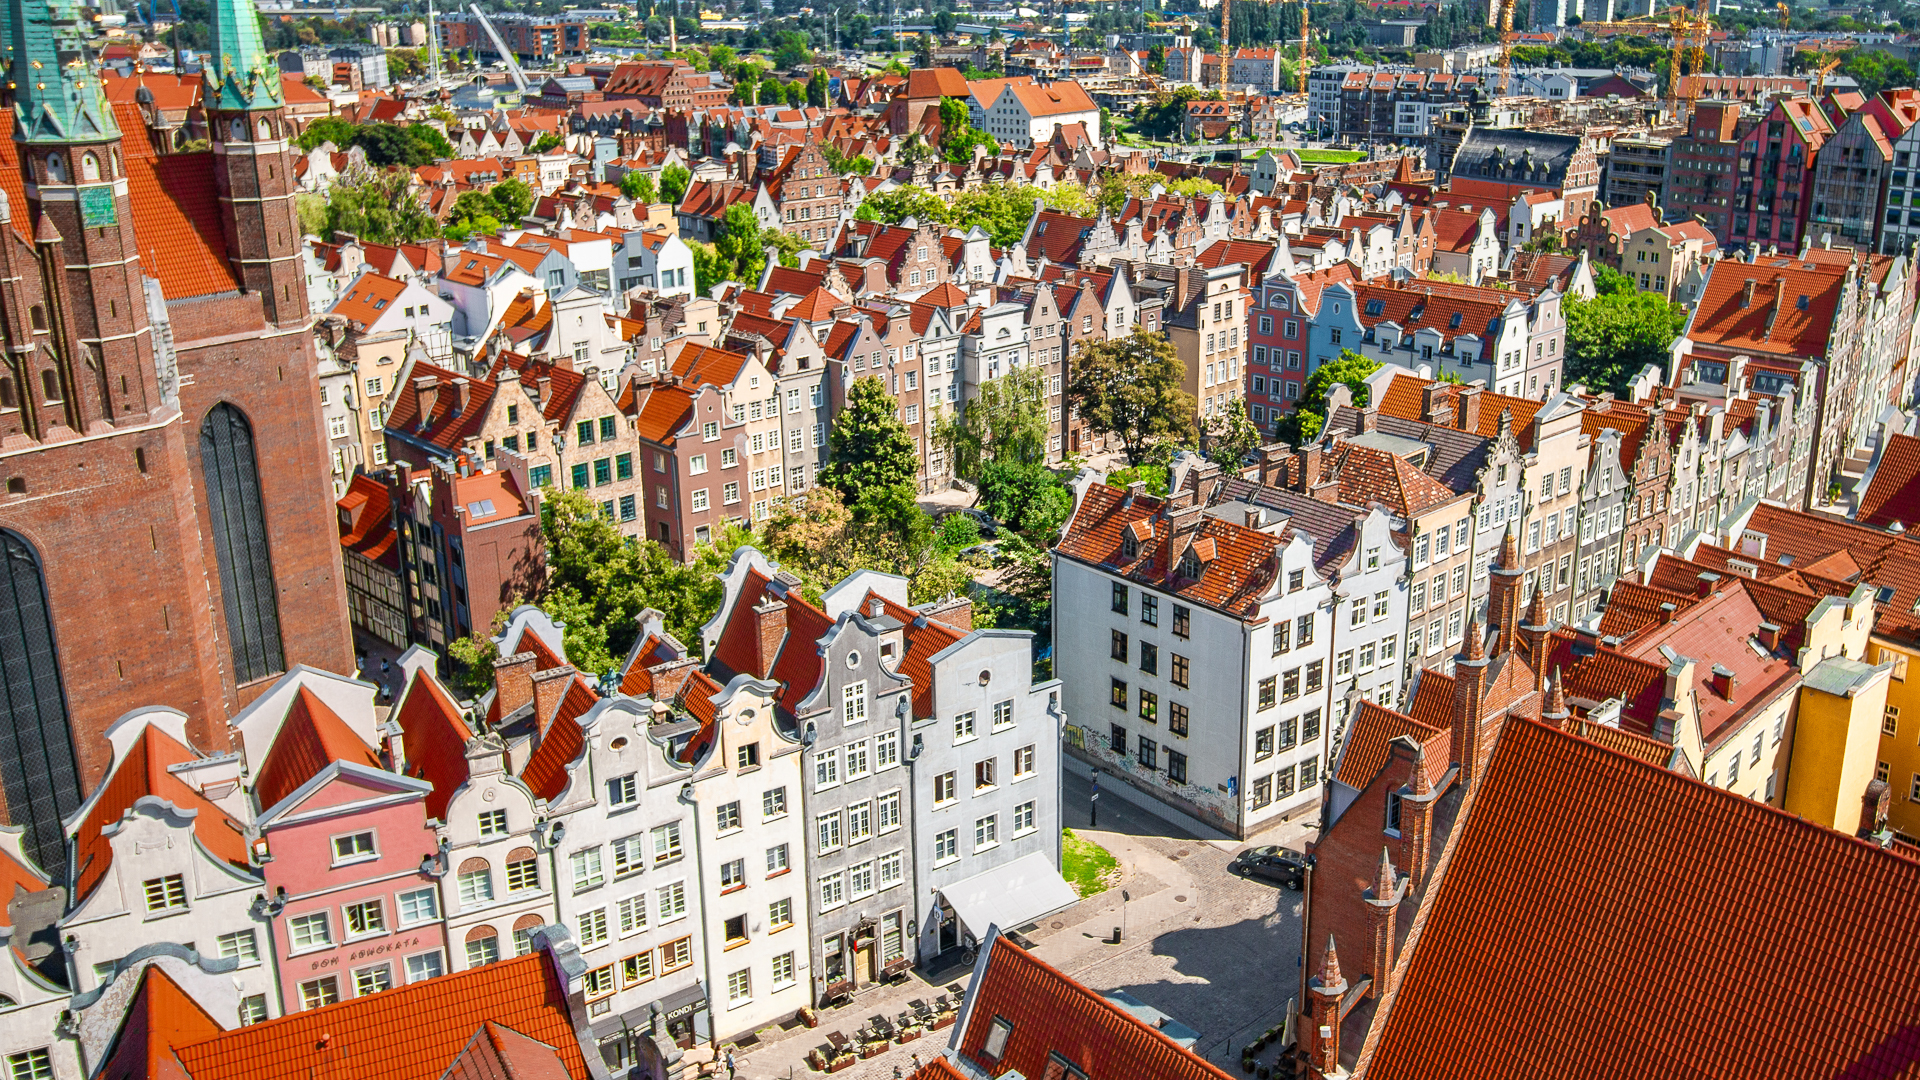 This is a panoramic view of Gdansk with its red-tiled roofs. 